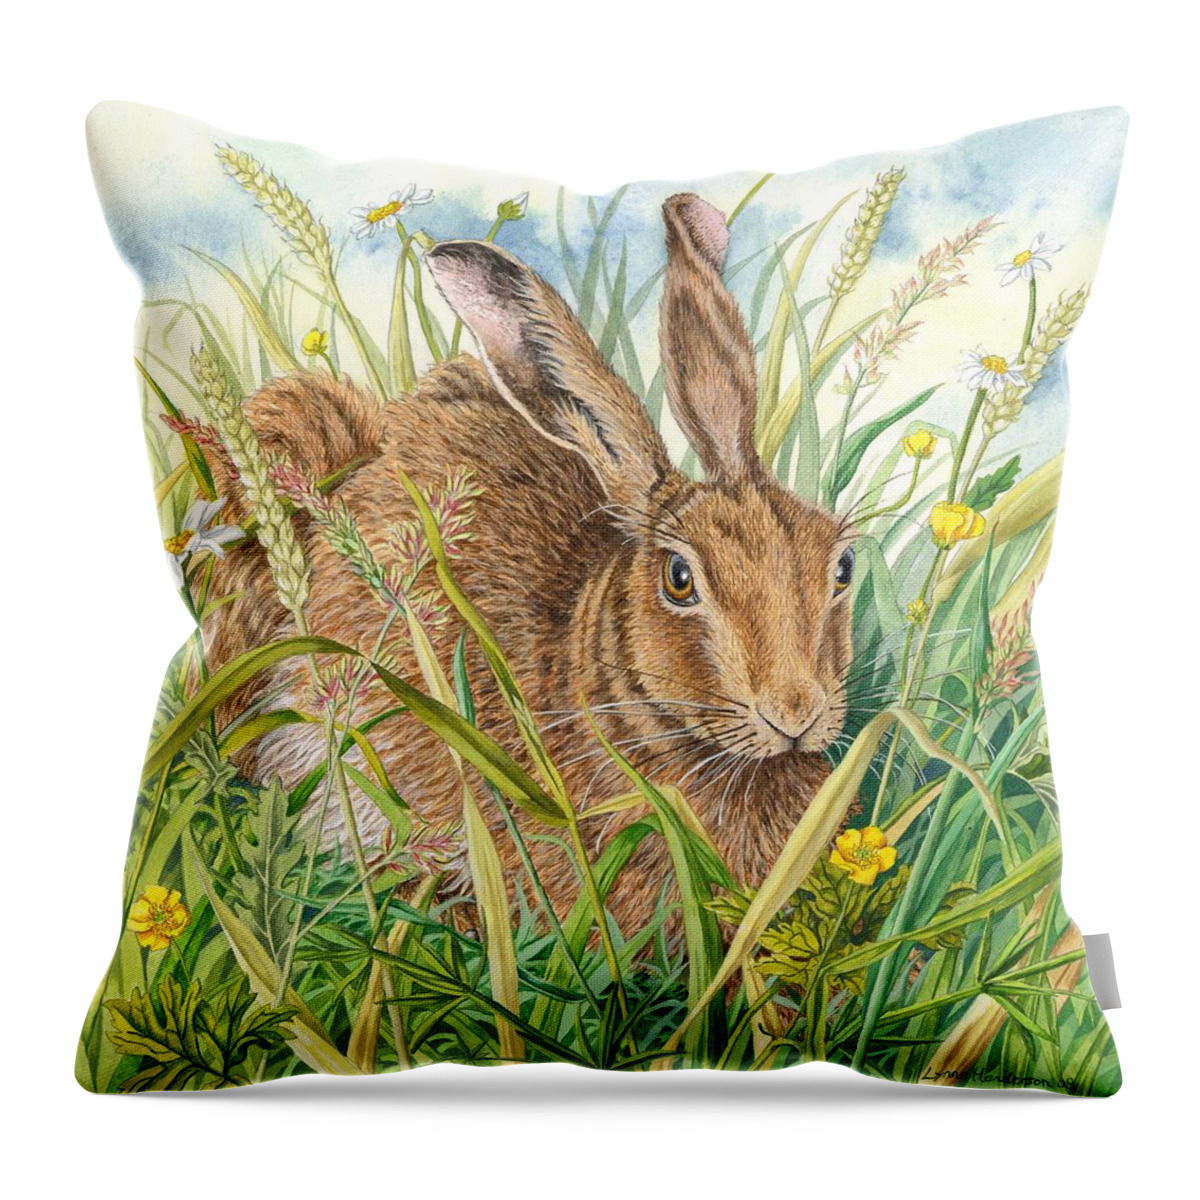 Hare Throw Pillow featuring the painting Brown Hare by Lynne Henderson